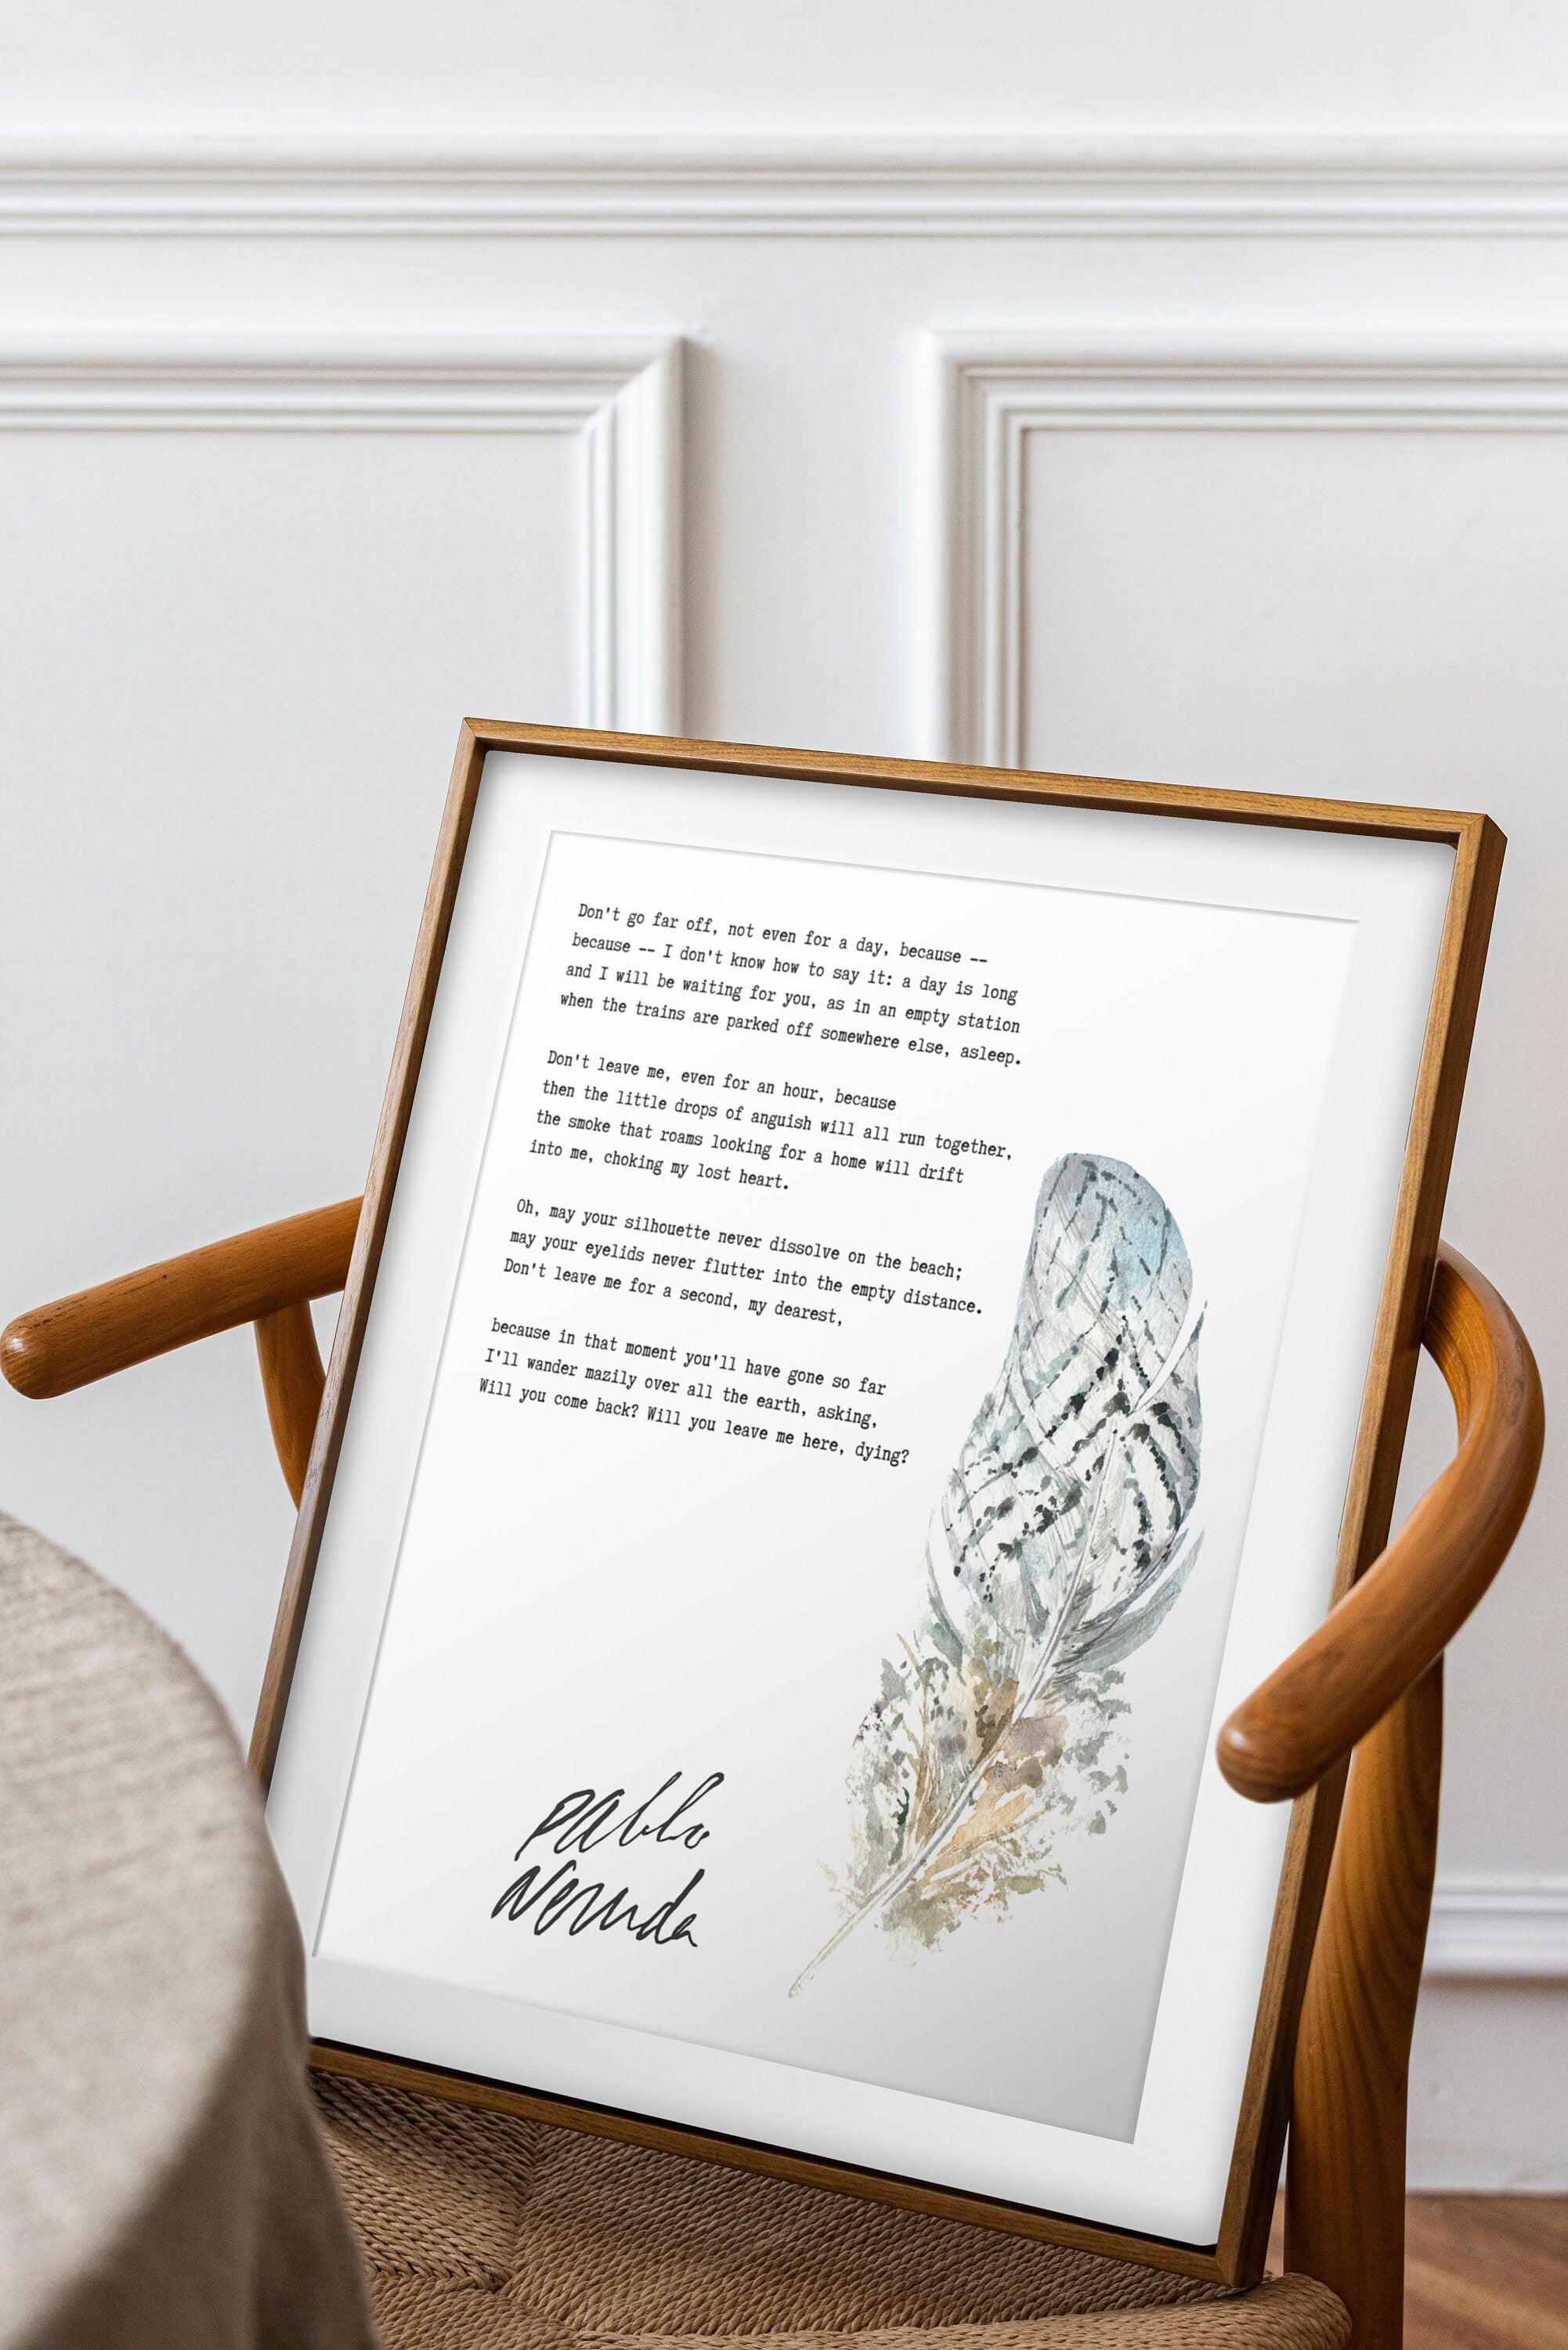 Pablo Neruda Don't go far off, not even for a day Unframed or Framed Poem Print in Black & White with Watercolour Feather Wall Art Decor